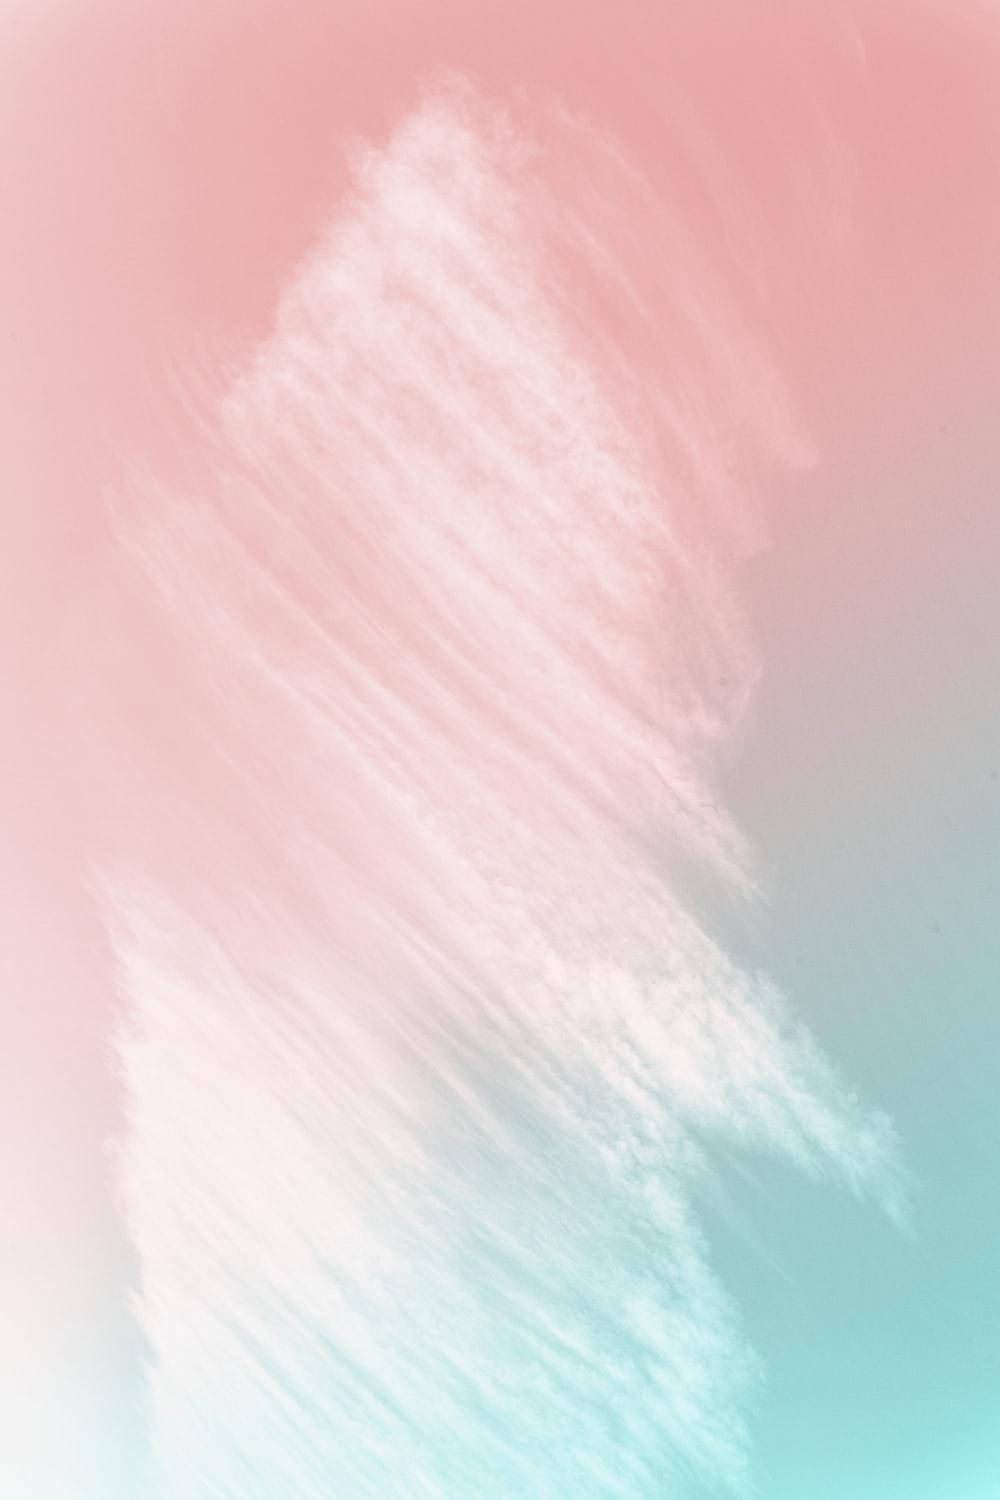 Vertical Cute Color Gradient Aesthetic Teal Background